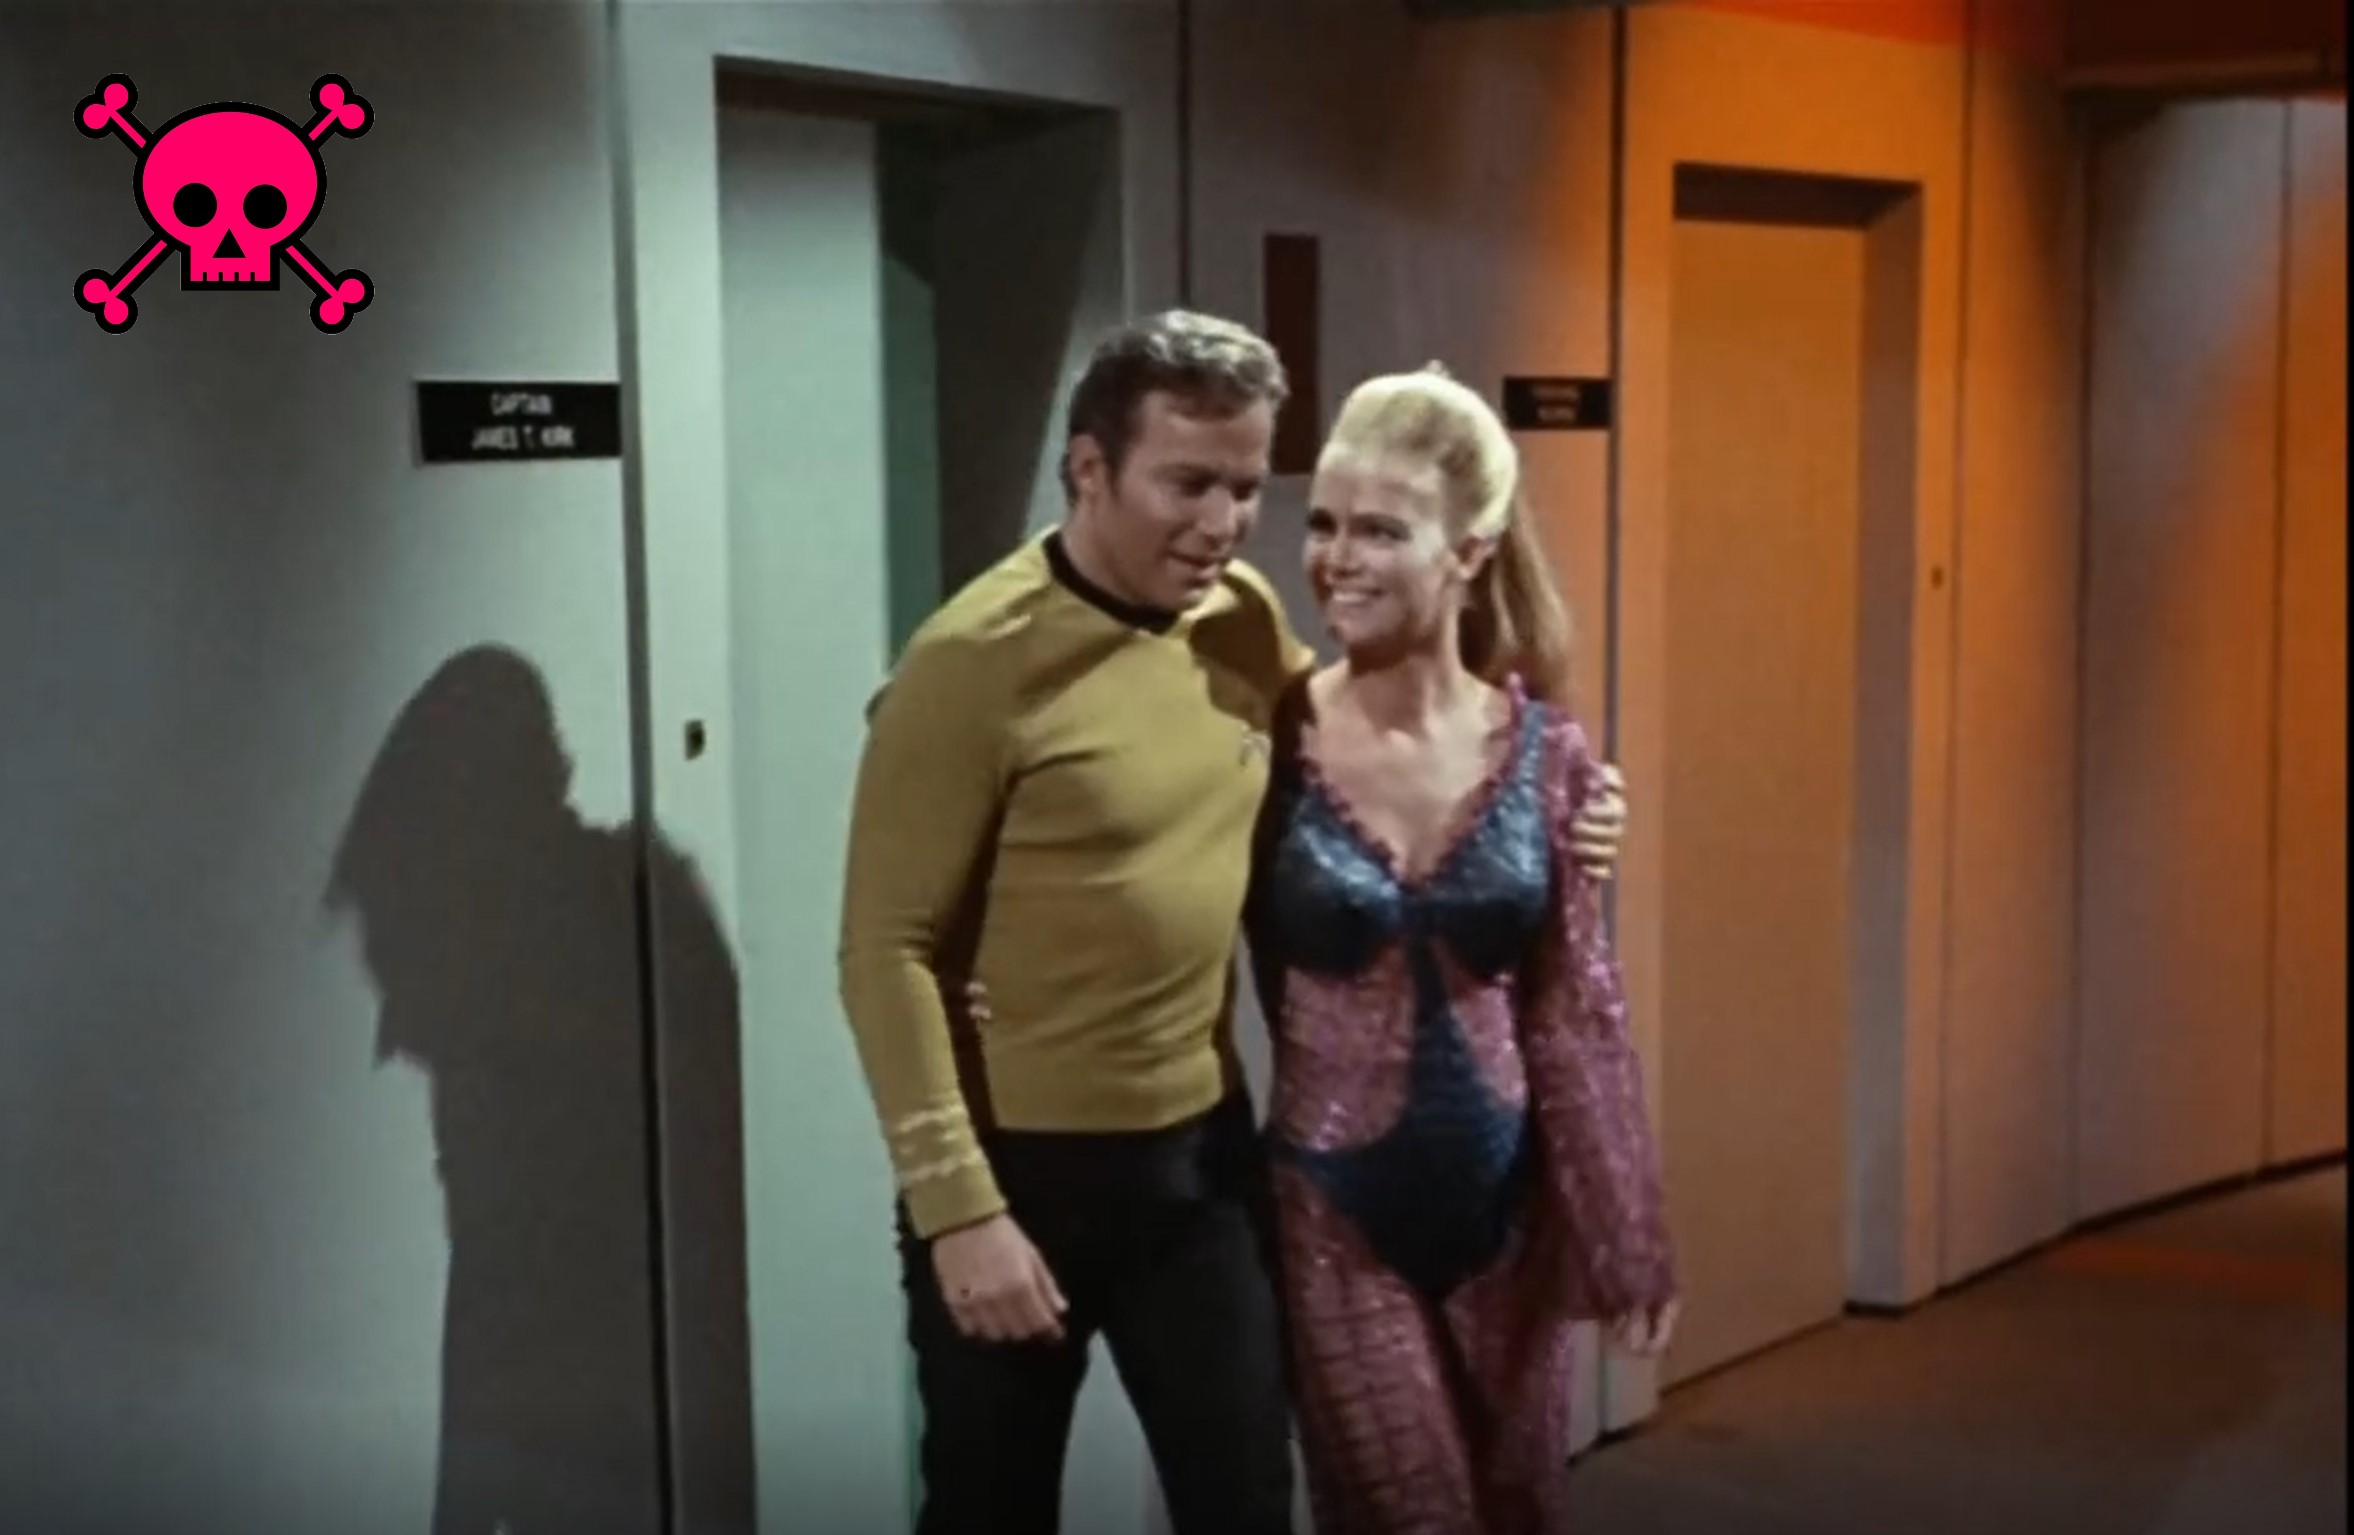 Kirk with his arm around Odonna's shoulders, leading her down a hallway